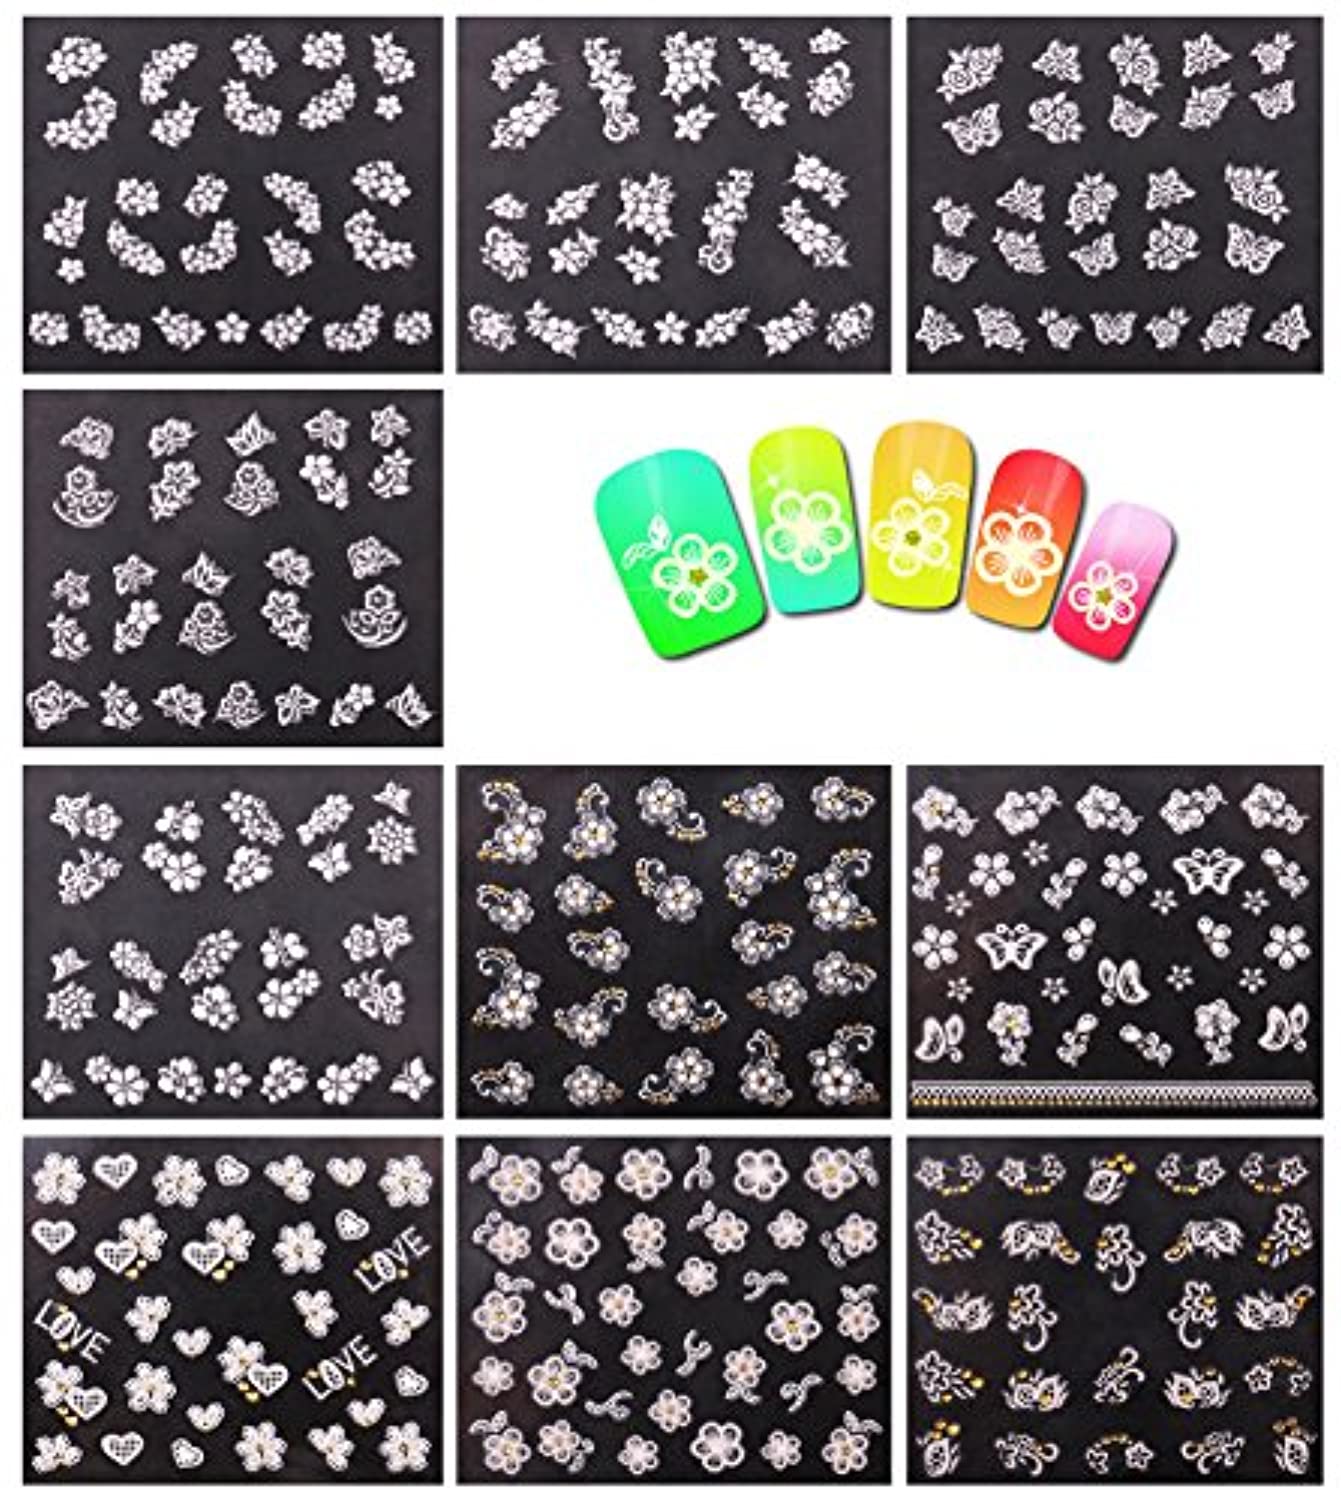 NiceDeco 50 Sheets 3D Design Self-Adhesive Tip Nail Stickers Nail Art Tattoo Nail Decals DIY Nail Art Decoration Flower/Butterfly/Fishes/Stars/Cat/Halloween Skull/Moustache/Lace